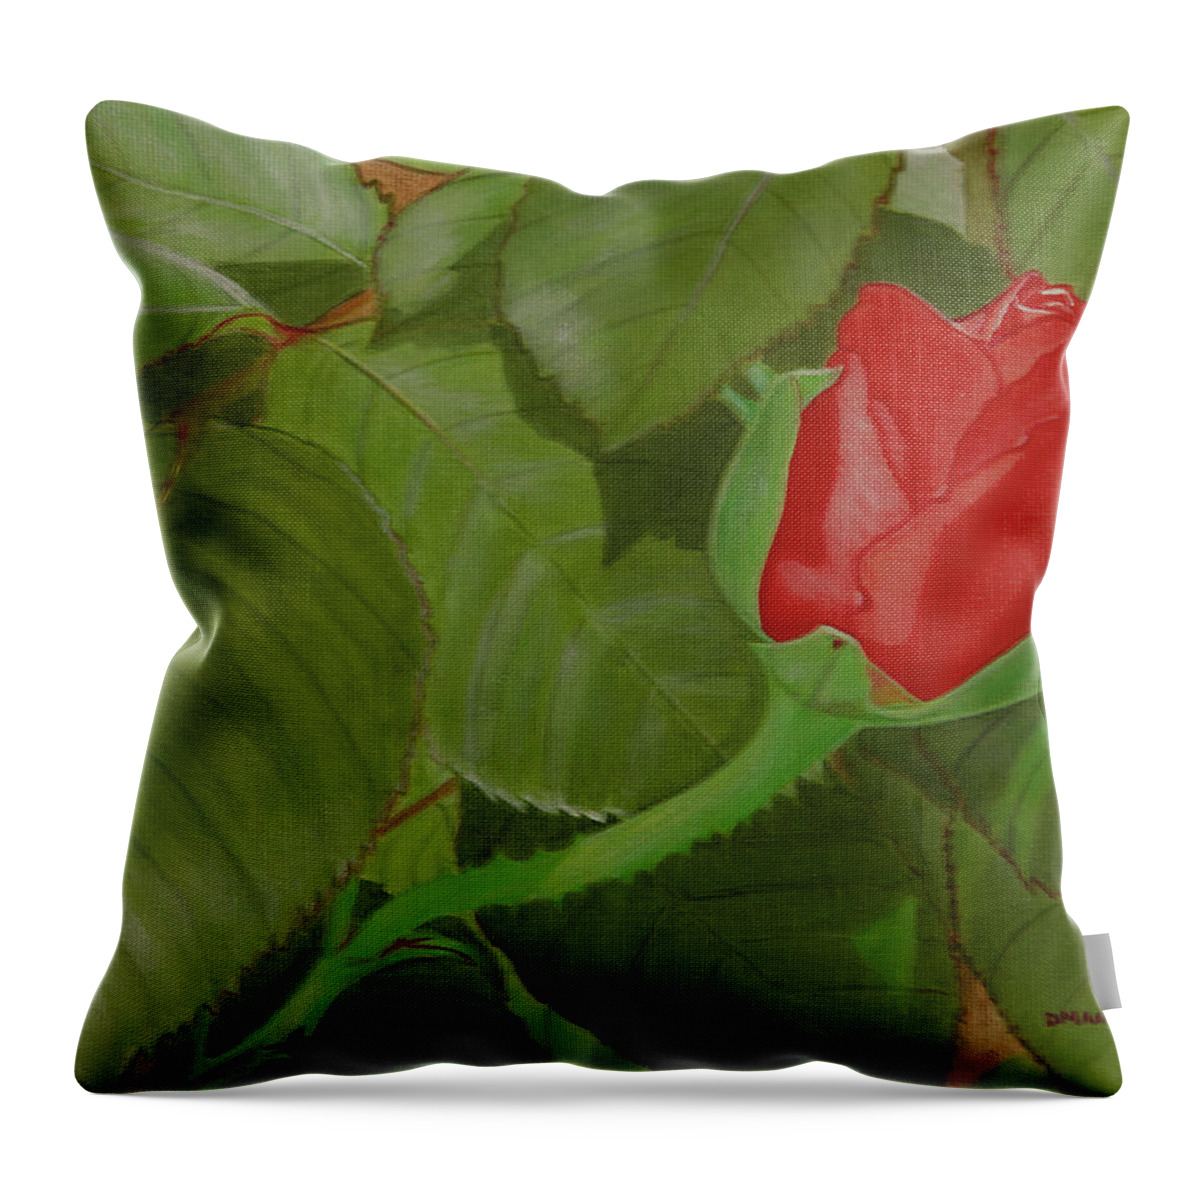 Rose Throw Pillow featuring the painting Arboretum Rose by Donna Manaraze